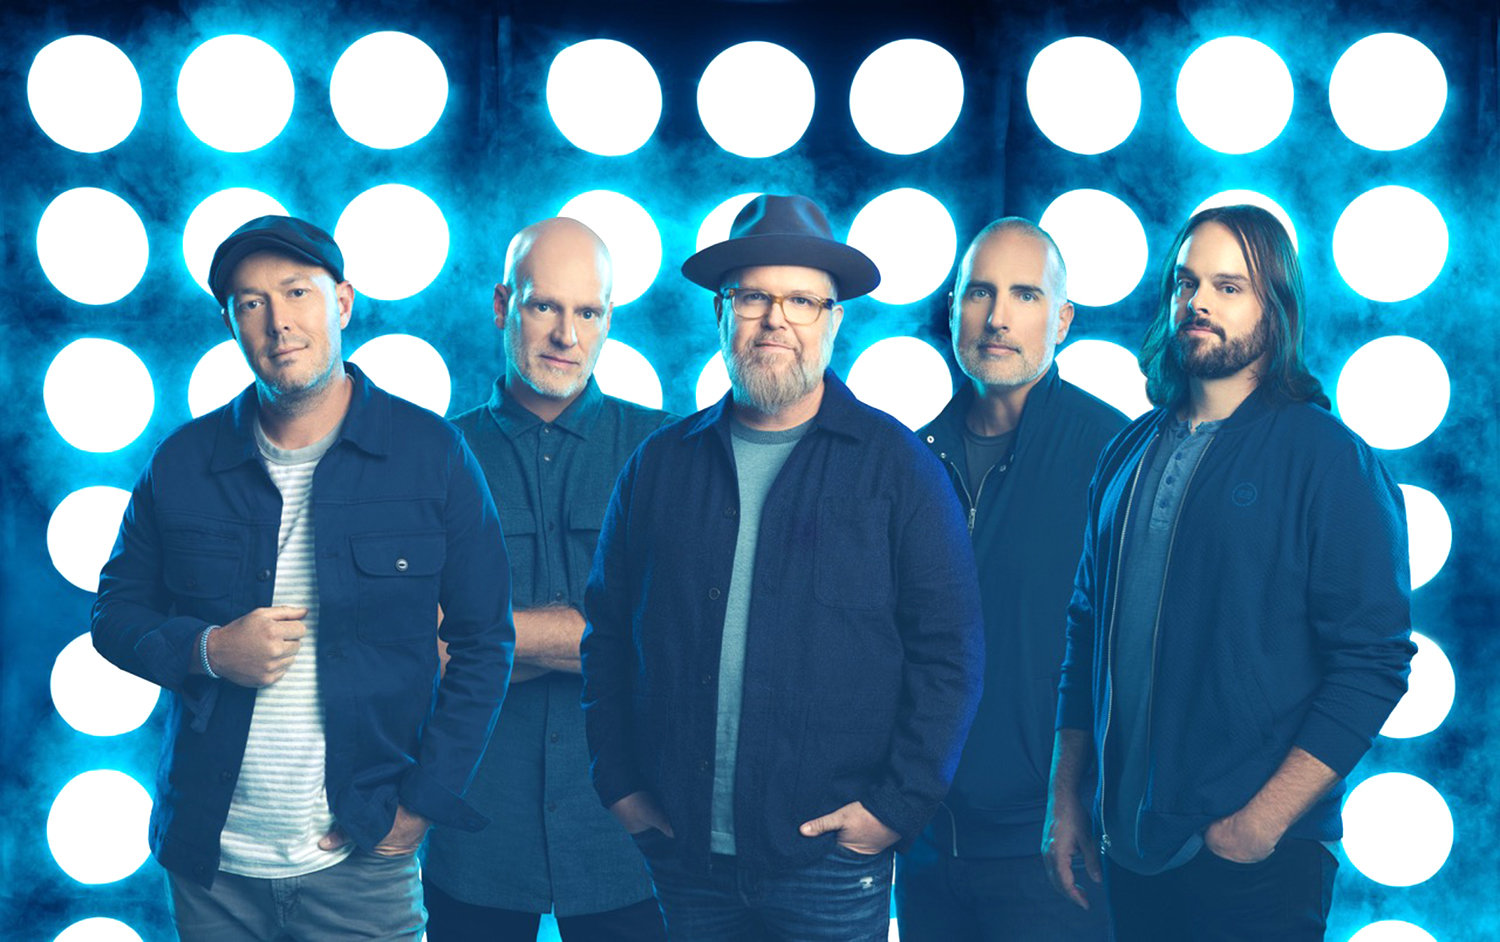 Christian band MercyMe makes first stop of new tour in Utica Daily